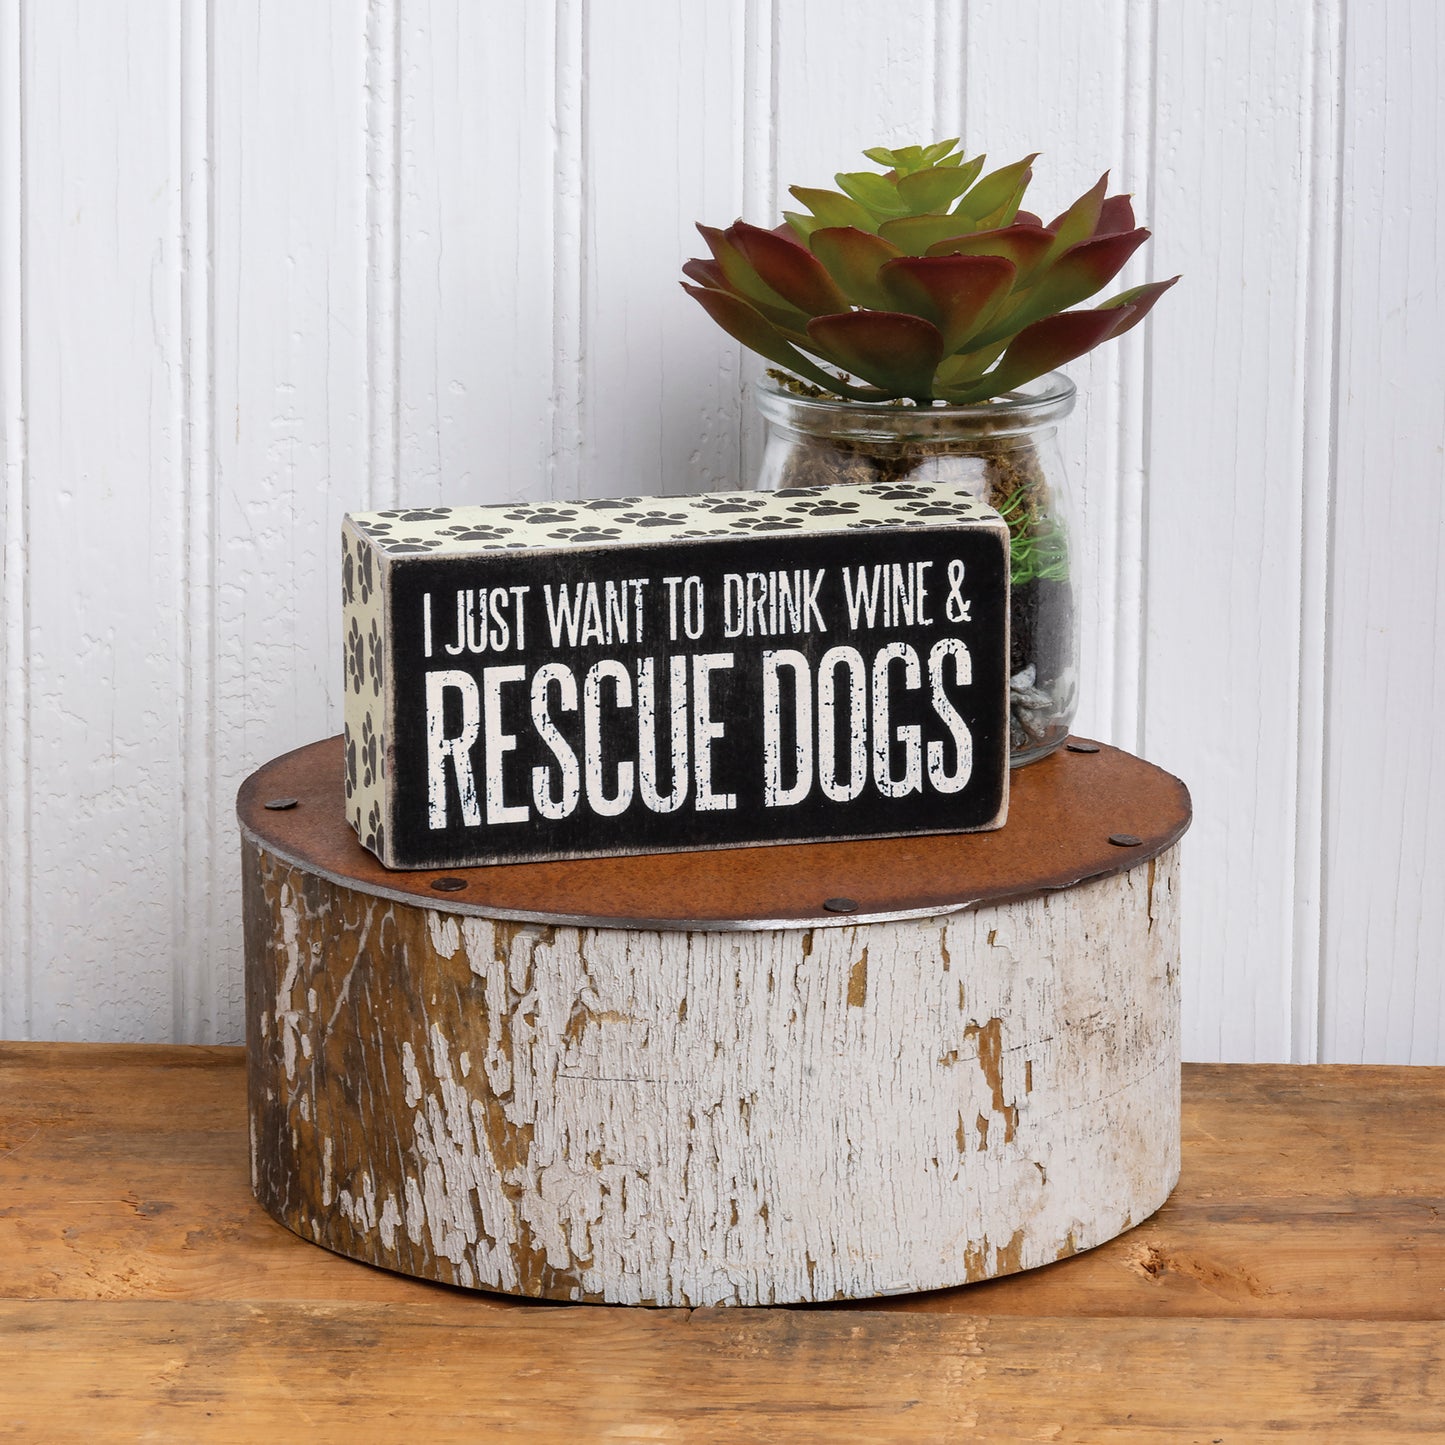 Block Sign - "I Just Want to Drink Wine & Rescue Dogs"